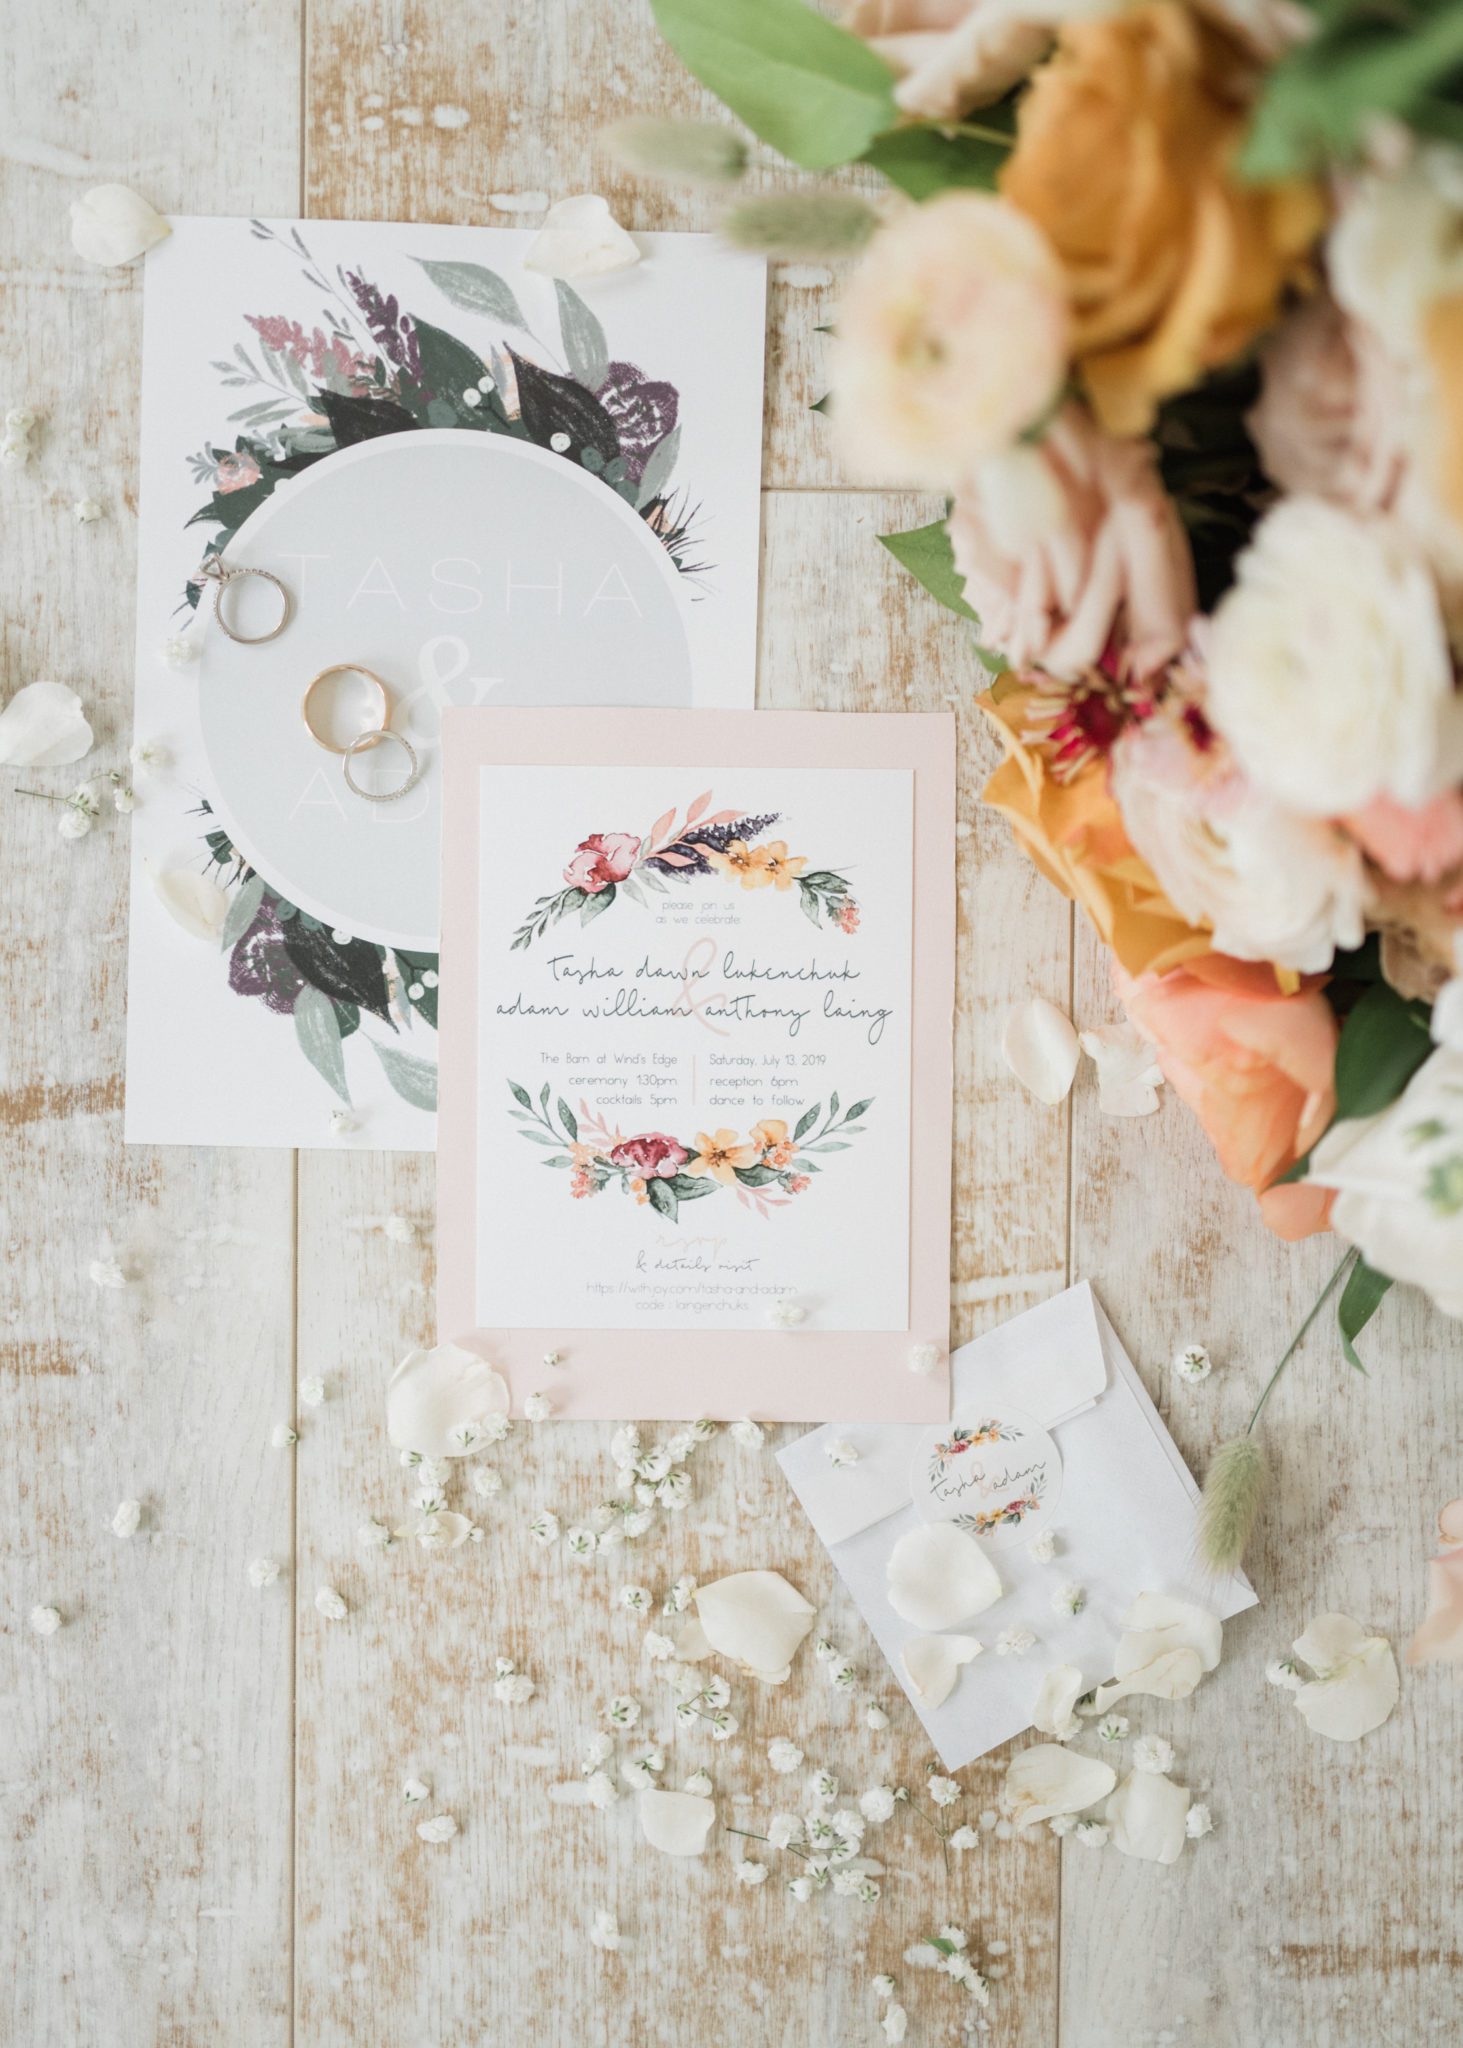 Romantic wedding stationery and wedding day details